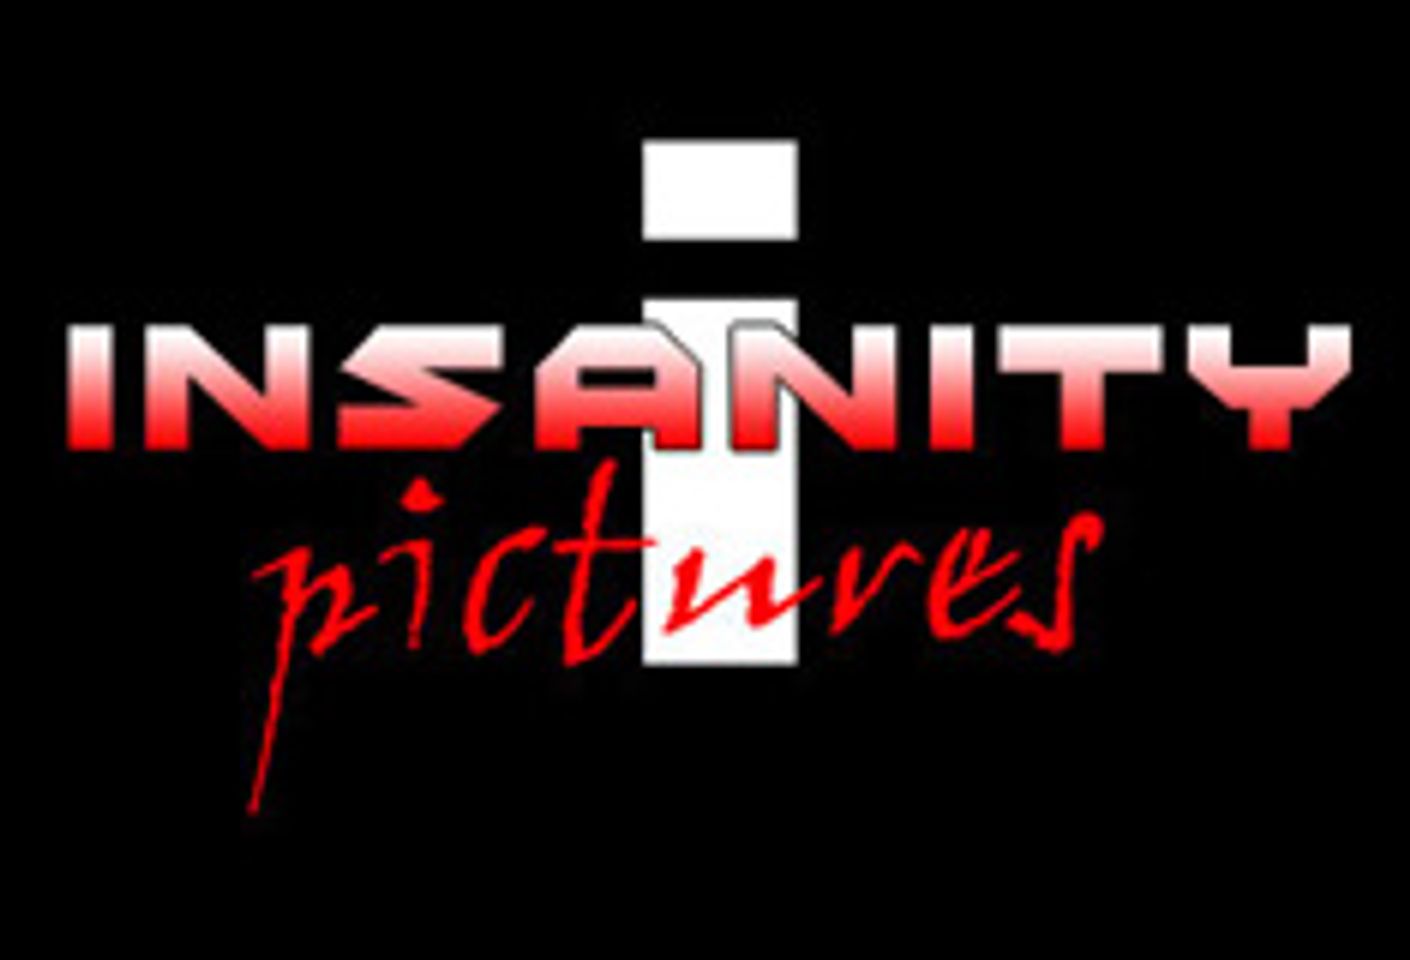 Insanity Pictures Now Distributed by NJ Films